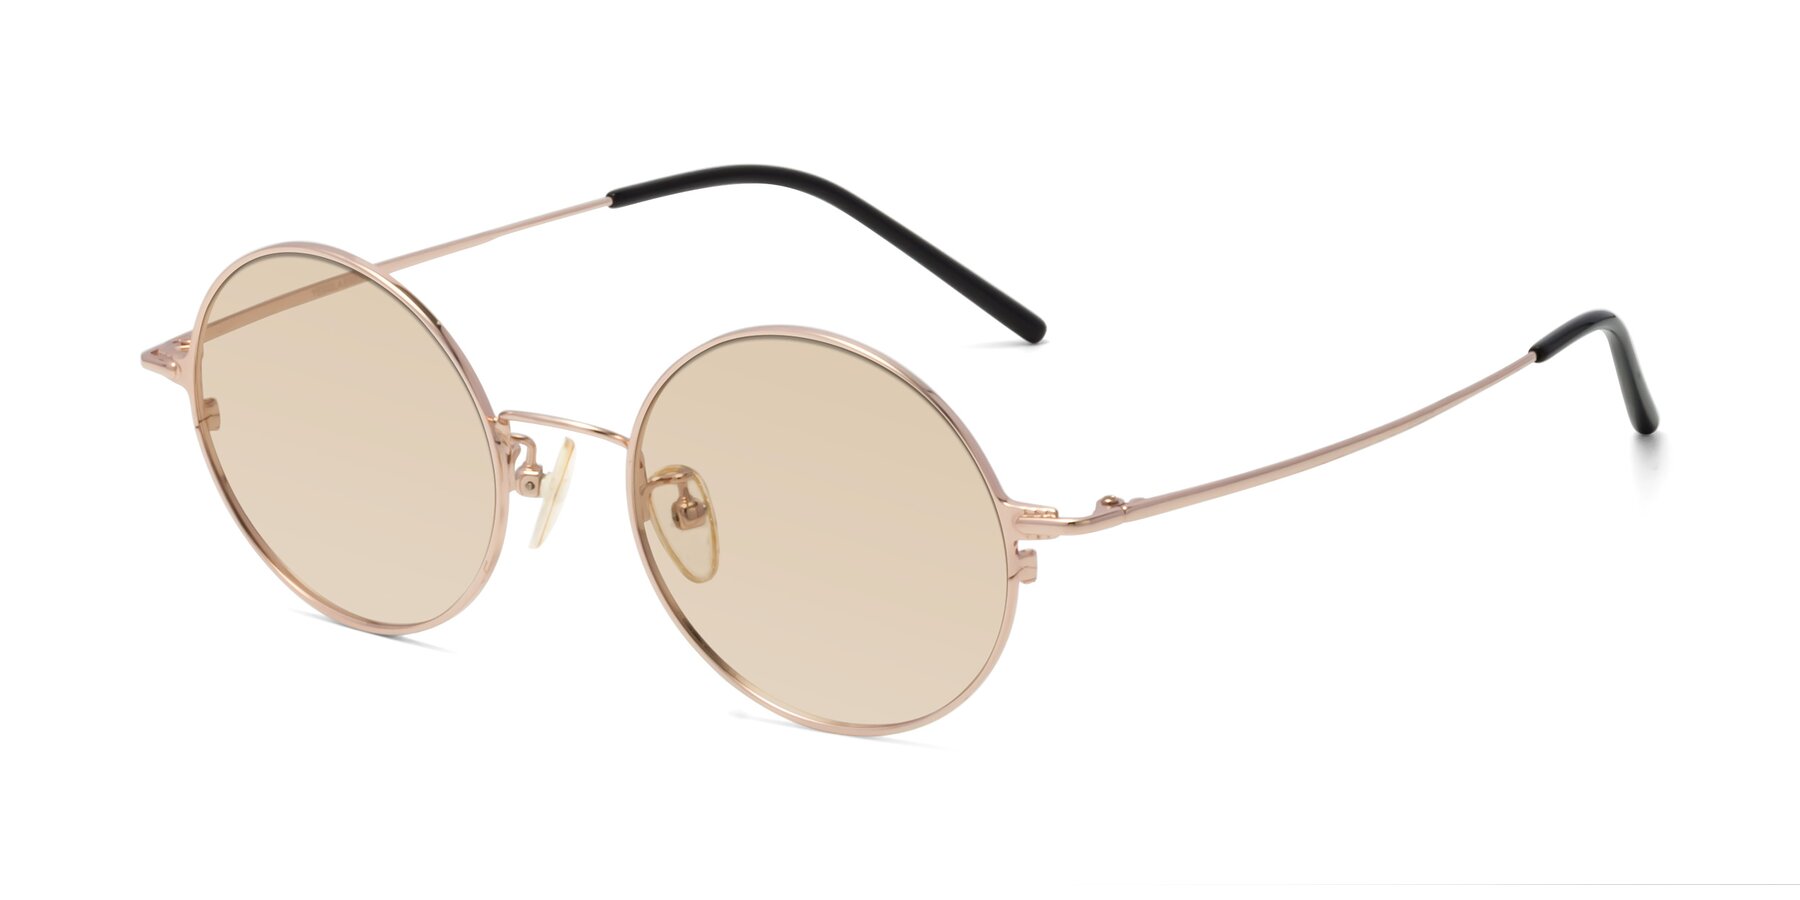 Angle of 18009 in Rose Gold with Light Brown Tinted Lenses